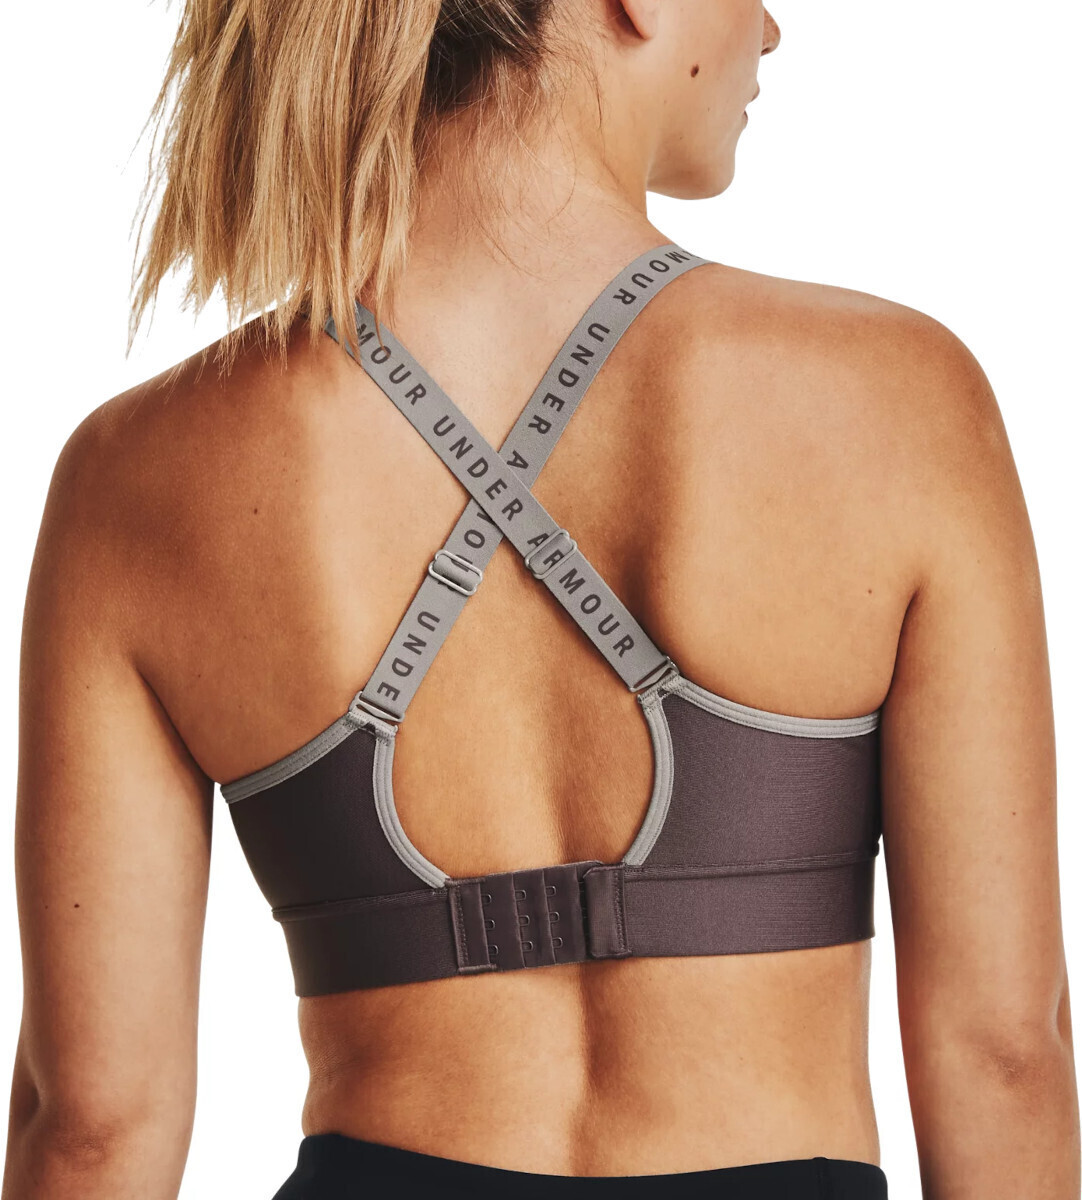 https://cdn.idealo.com/folder/Product/203607/3/203607337/s3_produktbild_max_3/under-armour-infinity-mid-covered-sports-bra-ash-taupe-pewter.jpg